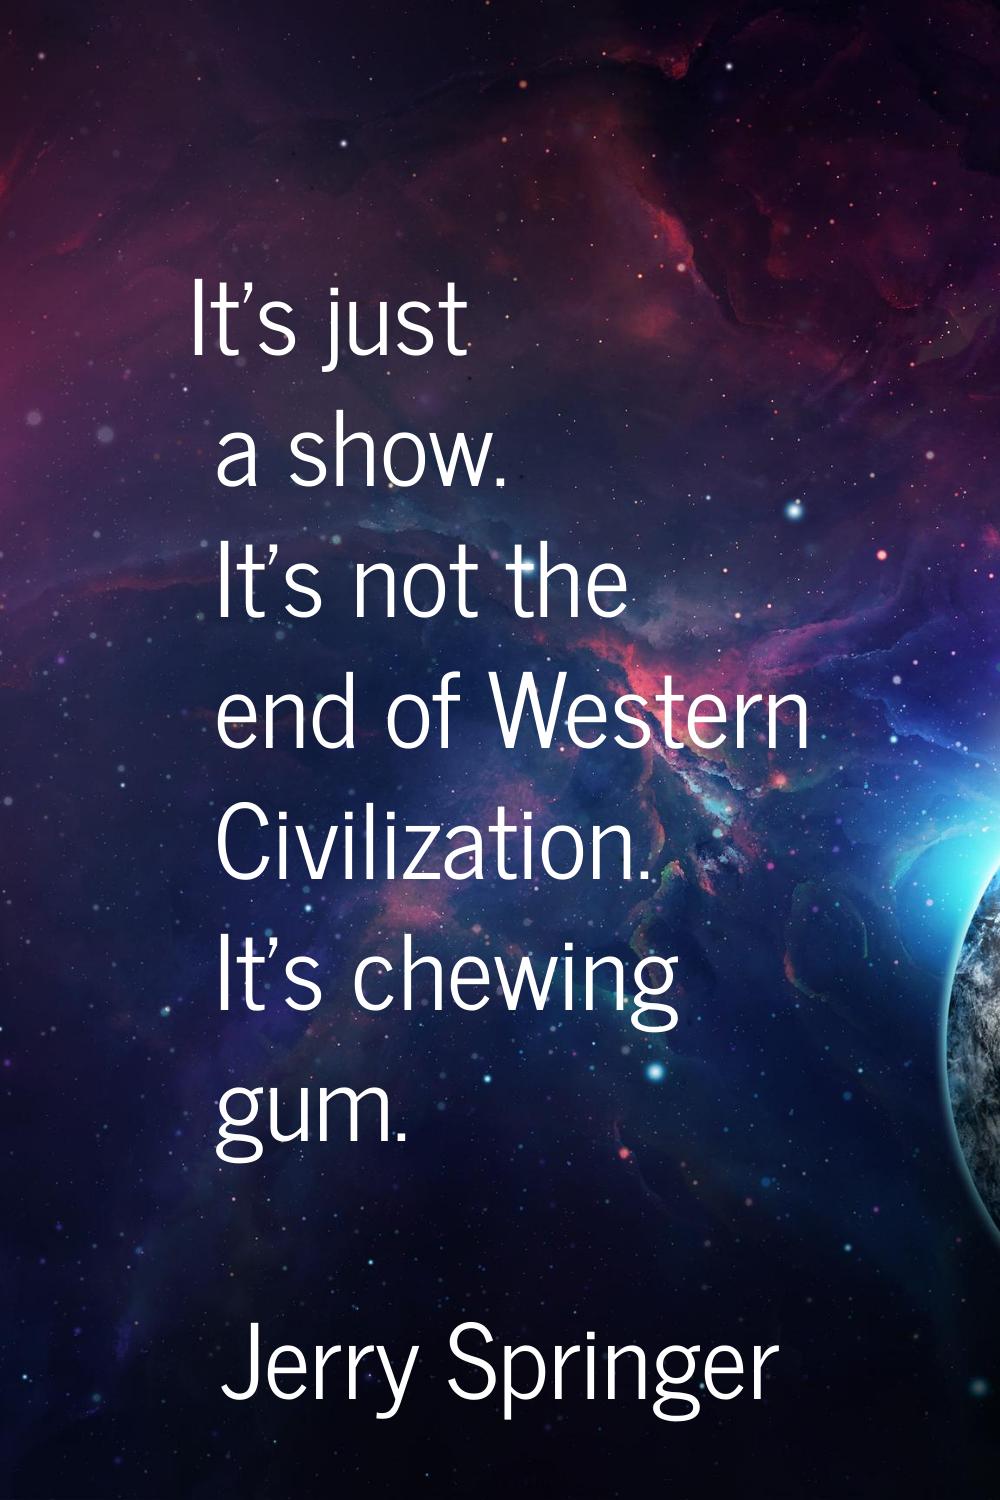 It's just a show. It's not the end of Western Civilization. It's chewing gum.